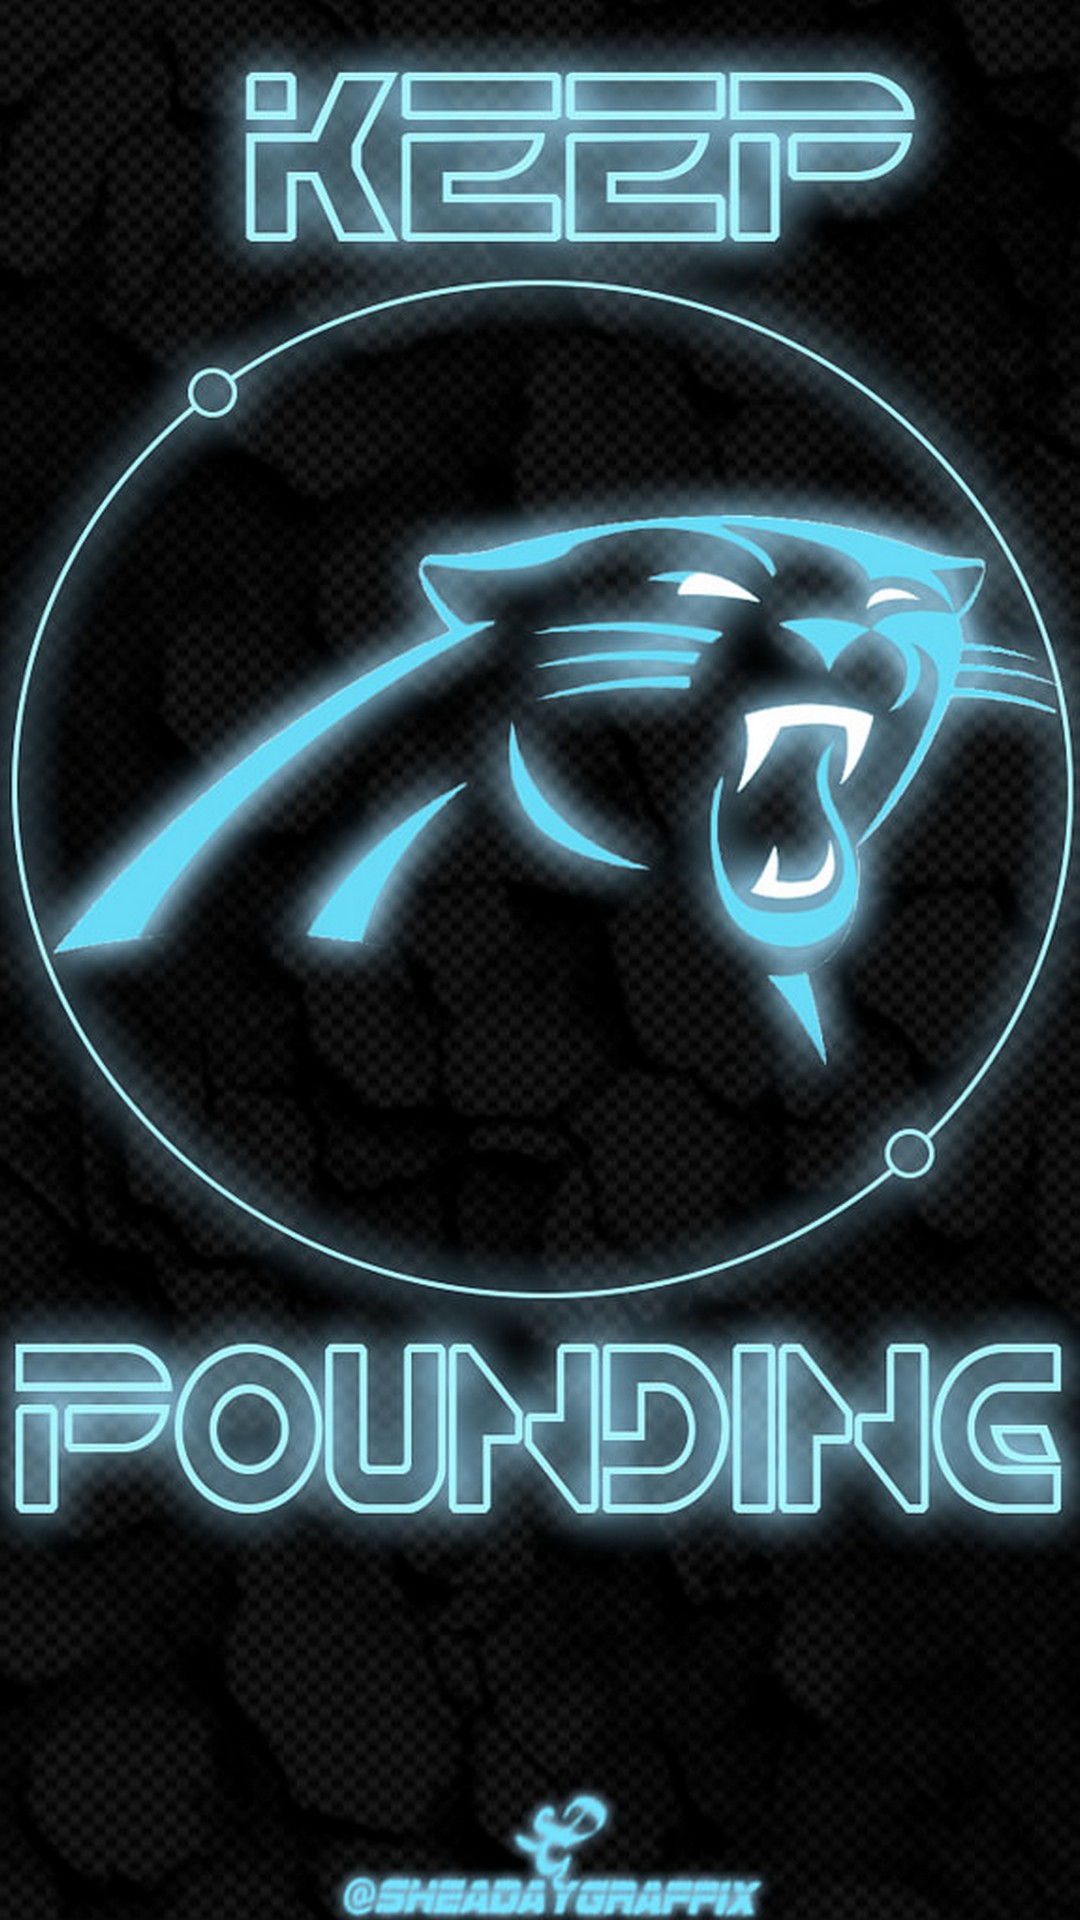 Carolina Panthers iPhone Home Screen Wallpaper With high-resolution 1080X1920 pixel. Download and set as wallpaper for Apple iPhone X, XS Max, XR, 8, 7, 6, SE, iPad, Android